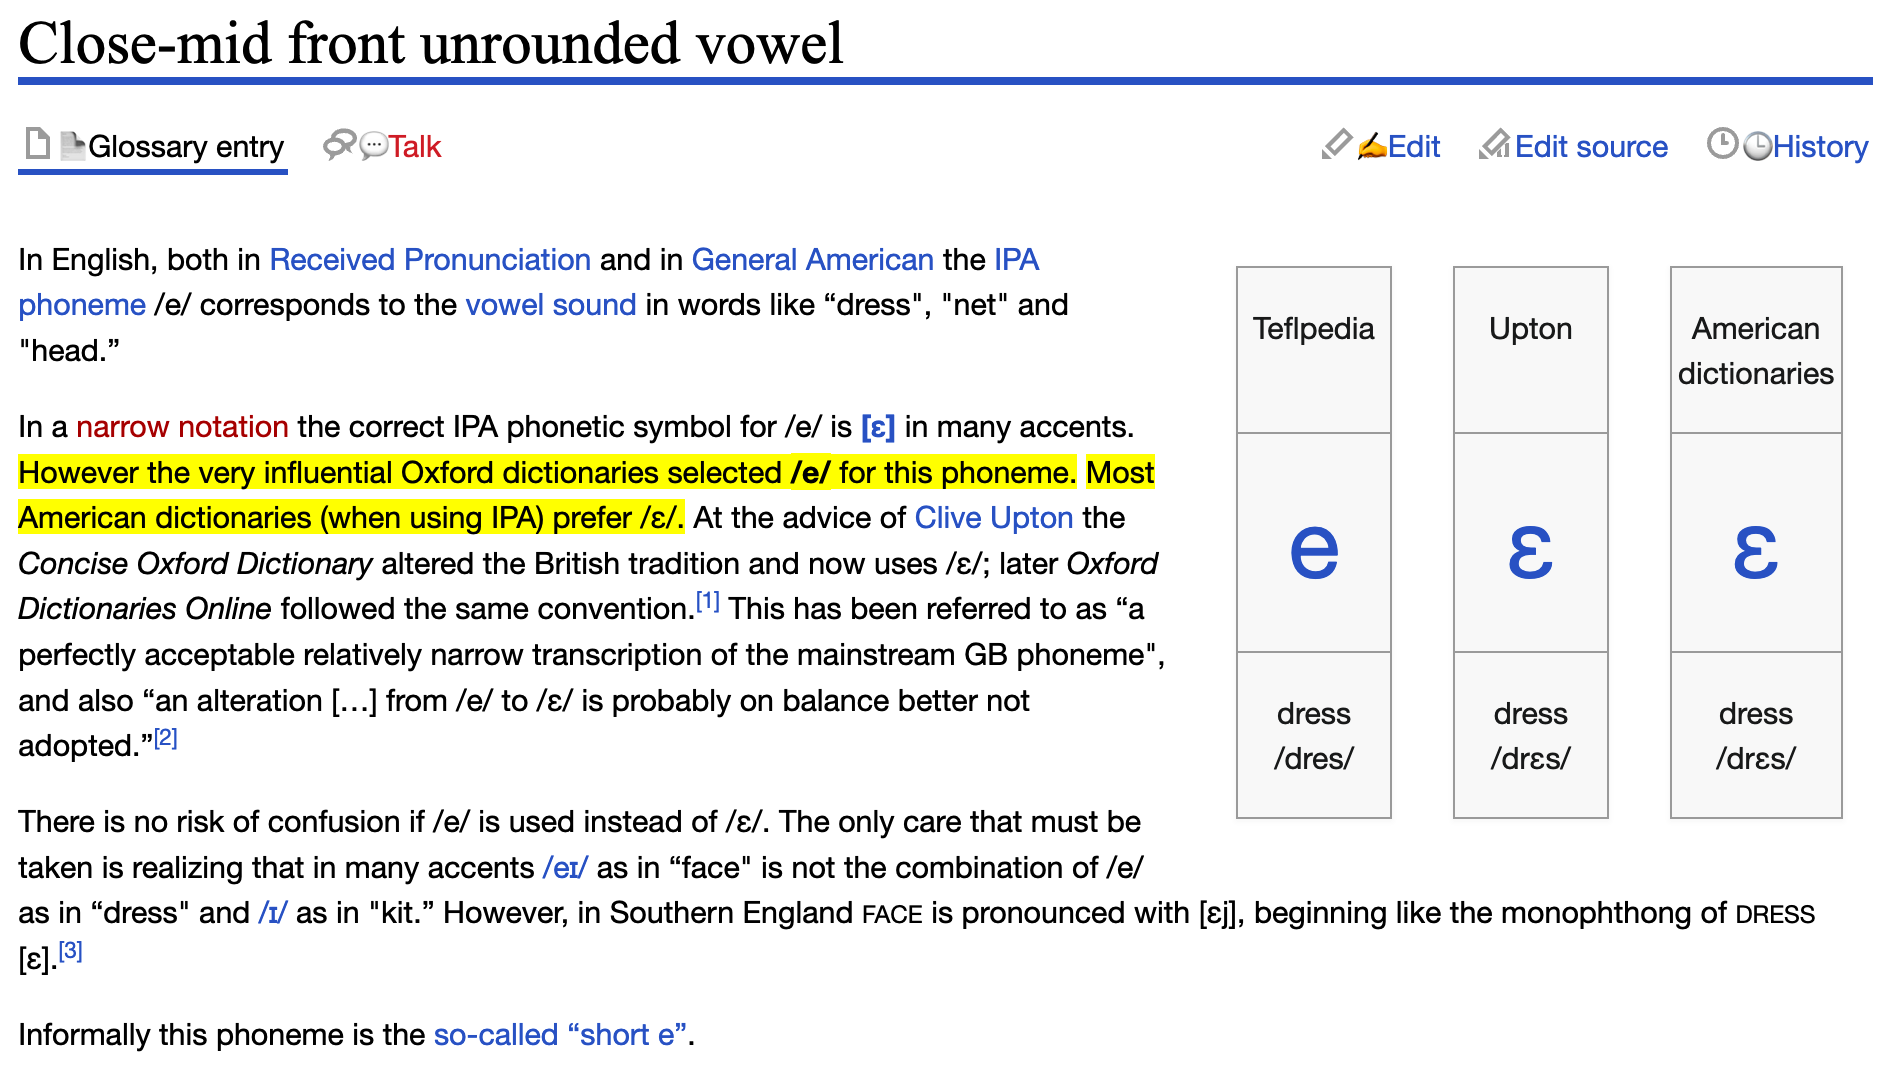 https://teflpedia.com/Close-mid_front_unrounded_vowel